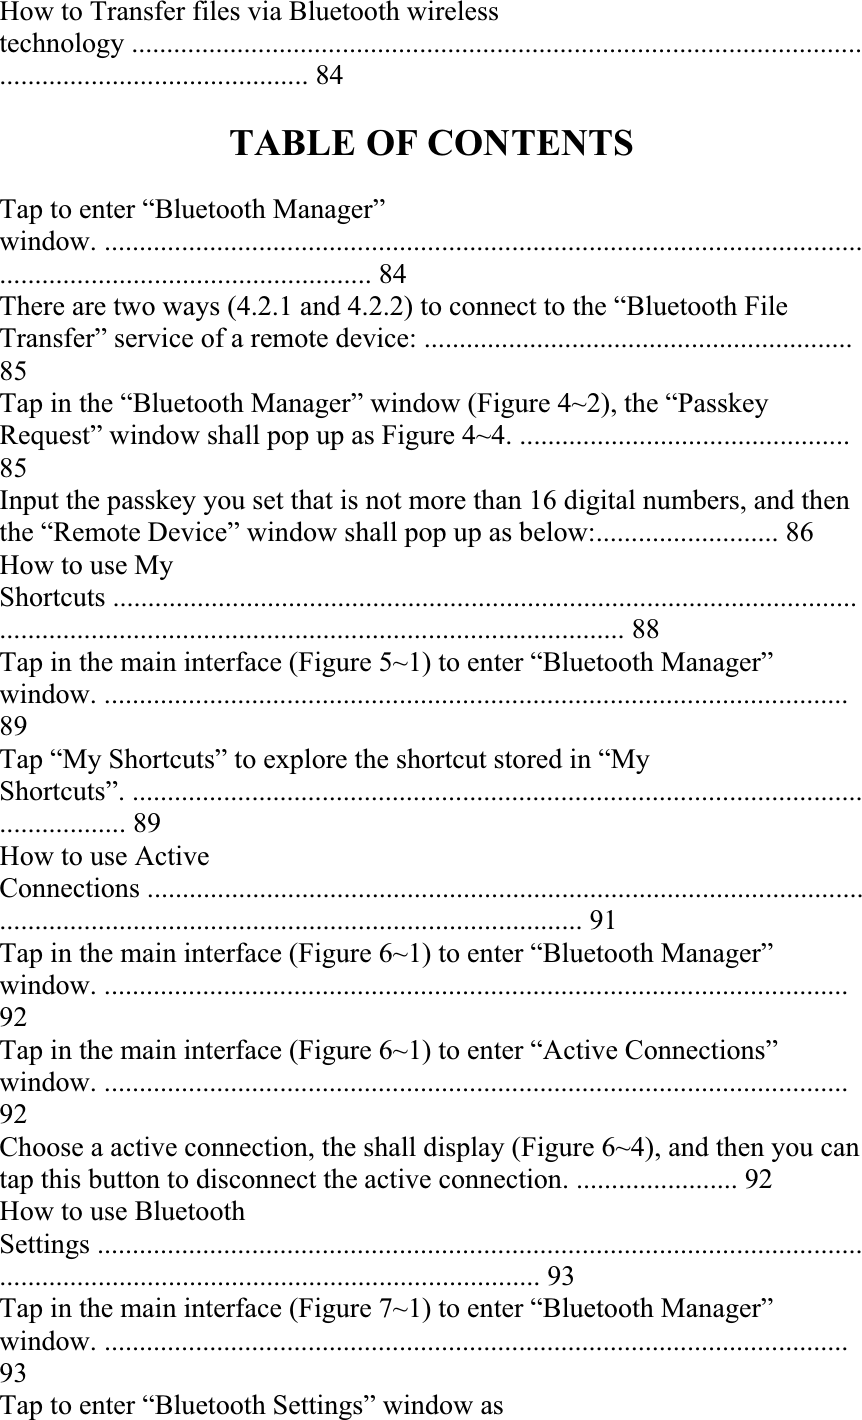 How to Transfer files via Bluetooth wireless technology .................................................................................................................................................... 84 TABLE OF CONTENTS Tap to enter “Bluetooth Manager” window. ................................................................................................................................................................. 84 There are two ways (4.2.1 and 4.2.2) to connect to the “Bluetooth File Transfer” service of a remote device: .............................................................85Tap in the “Bluetooth Manager” window (Figure 4~2), the “Passkey Request” window shall pop up as Figure 4~4. ...............................................85Input the passkey you set that is not more than 16 digital numbers, and then the “Remote Device” window shall pop up as below:.......................... 86 How to use My Shortcuts ................................................................................................................................................................................................... 88 Tap in the main interface (Figure 5~1) to enter “Bluetooth Manager” window. ..........................................................................................................89Tap “My Shortcuts” to explore the shortcut stored in “My Shortcuts”. .......................................................................................................................... 89 How to use Active Connections ......................................................................................................................................................................................... 91 Tap in the main interface (Figure 6~1) to enter “Bluetooth Manager” window. ..........................................................................................................92Tap in the main interface (Figure 6~1) to enter “Active Connections” window. ..........................................................................................................92Choose a active connection, the shall display (Figure 6~4), and then you can tap this button to disconnect the active connection. ....................... 92 How to use Bluetooth Settings .......................................................................................................................................................................................... 93 Tap in the main interface (Figure 7~1) to enter “Bluetooth Manager” window. ..........................................................................................................93Tap to enter “Bluetooth Settings” window as 